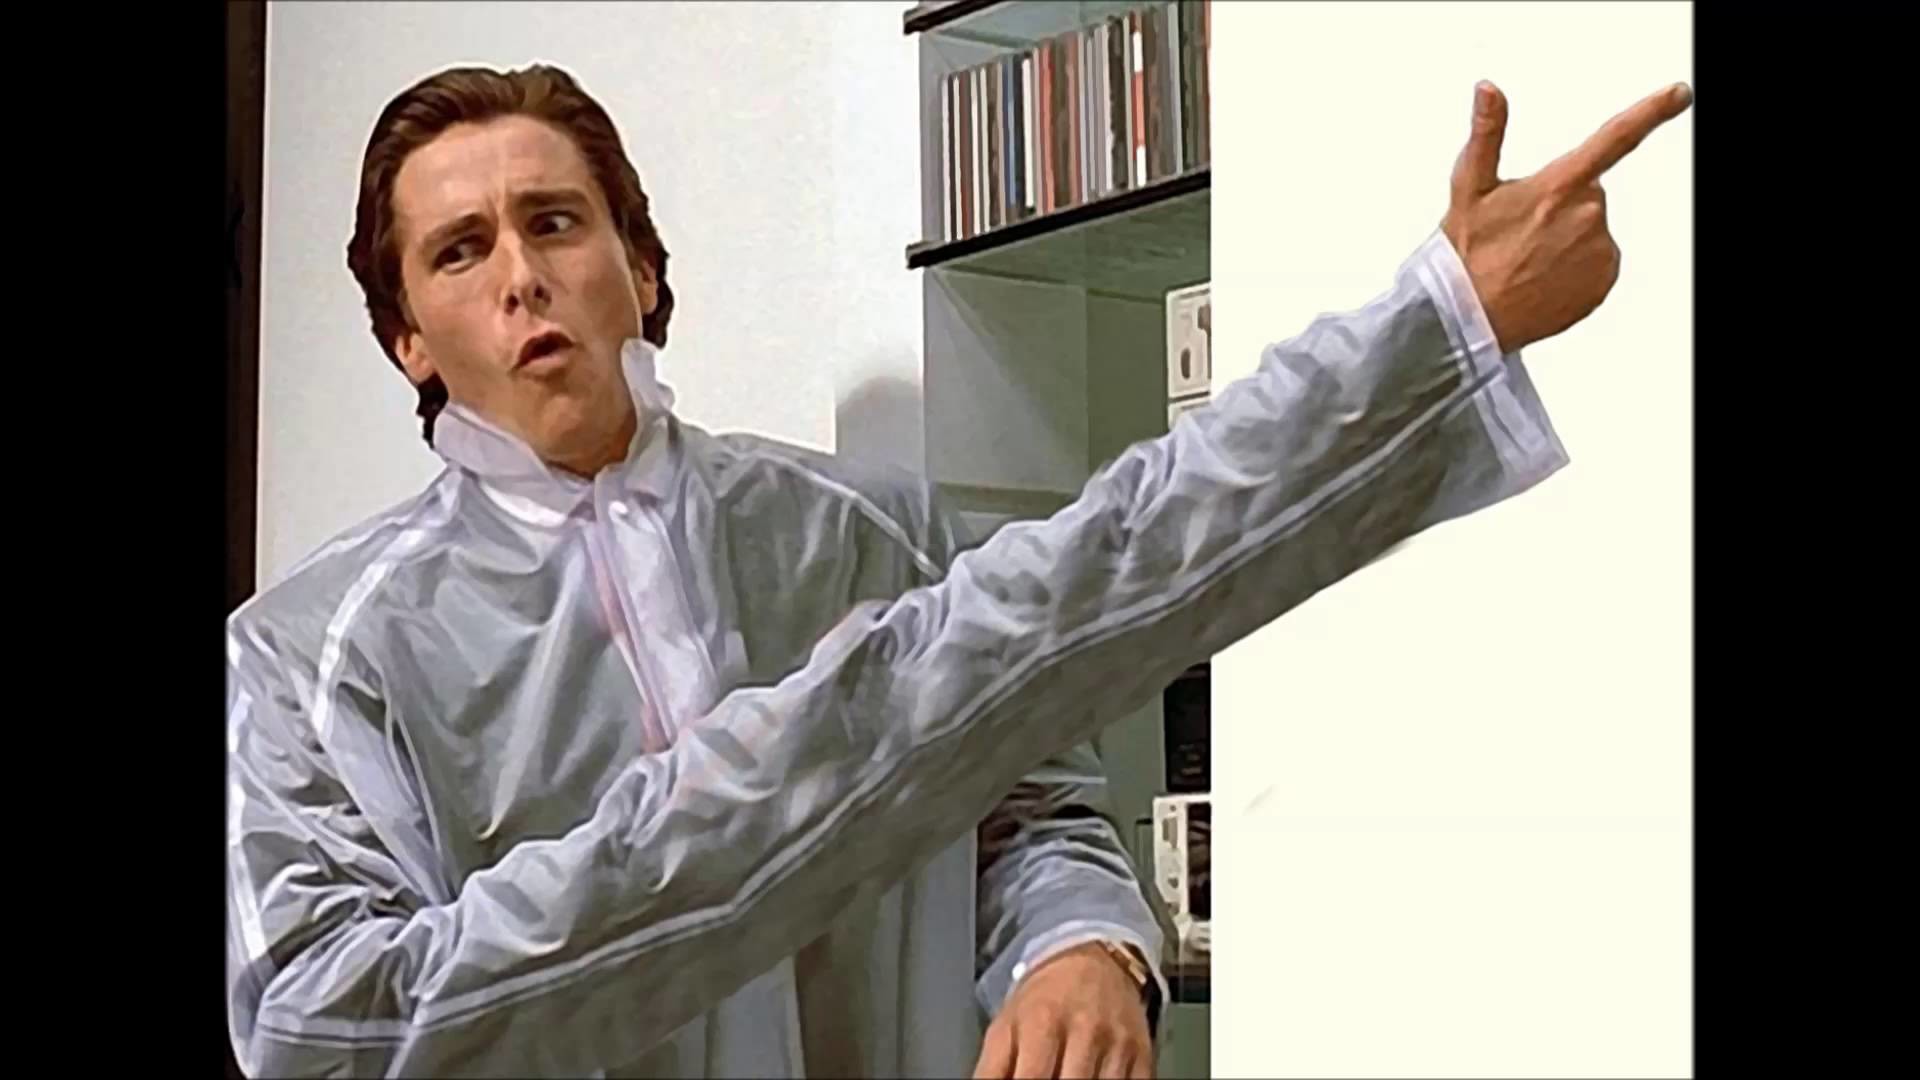 HD wallpaper American Psycho couch Christian Bale sitting one person   Wallpaper Flare